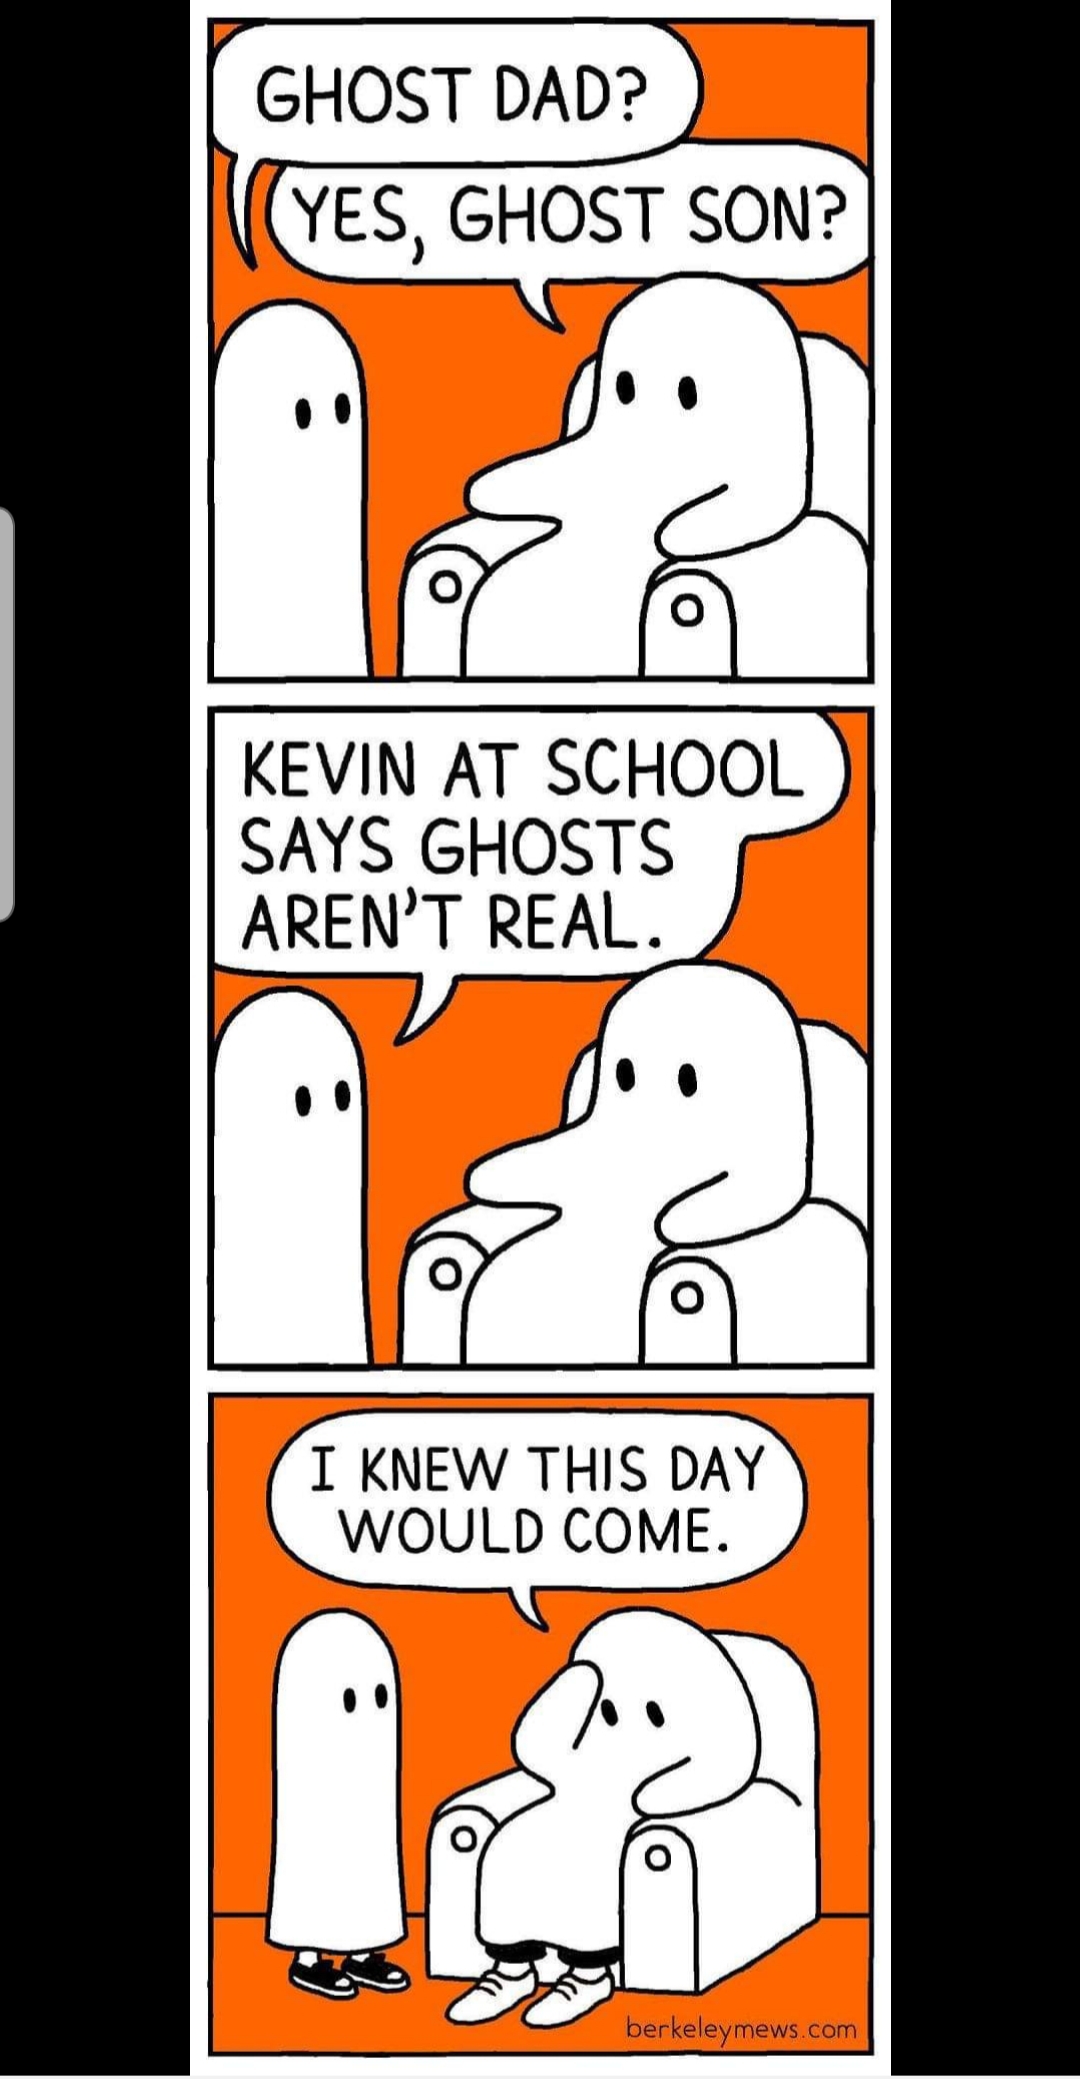 comics - Ghost Dad? Yes, Ghost Son? Kevin At School Says Ghosts Aren'T Real. I Knew This Day Would Come.